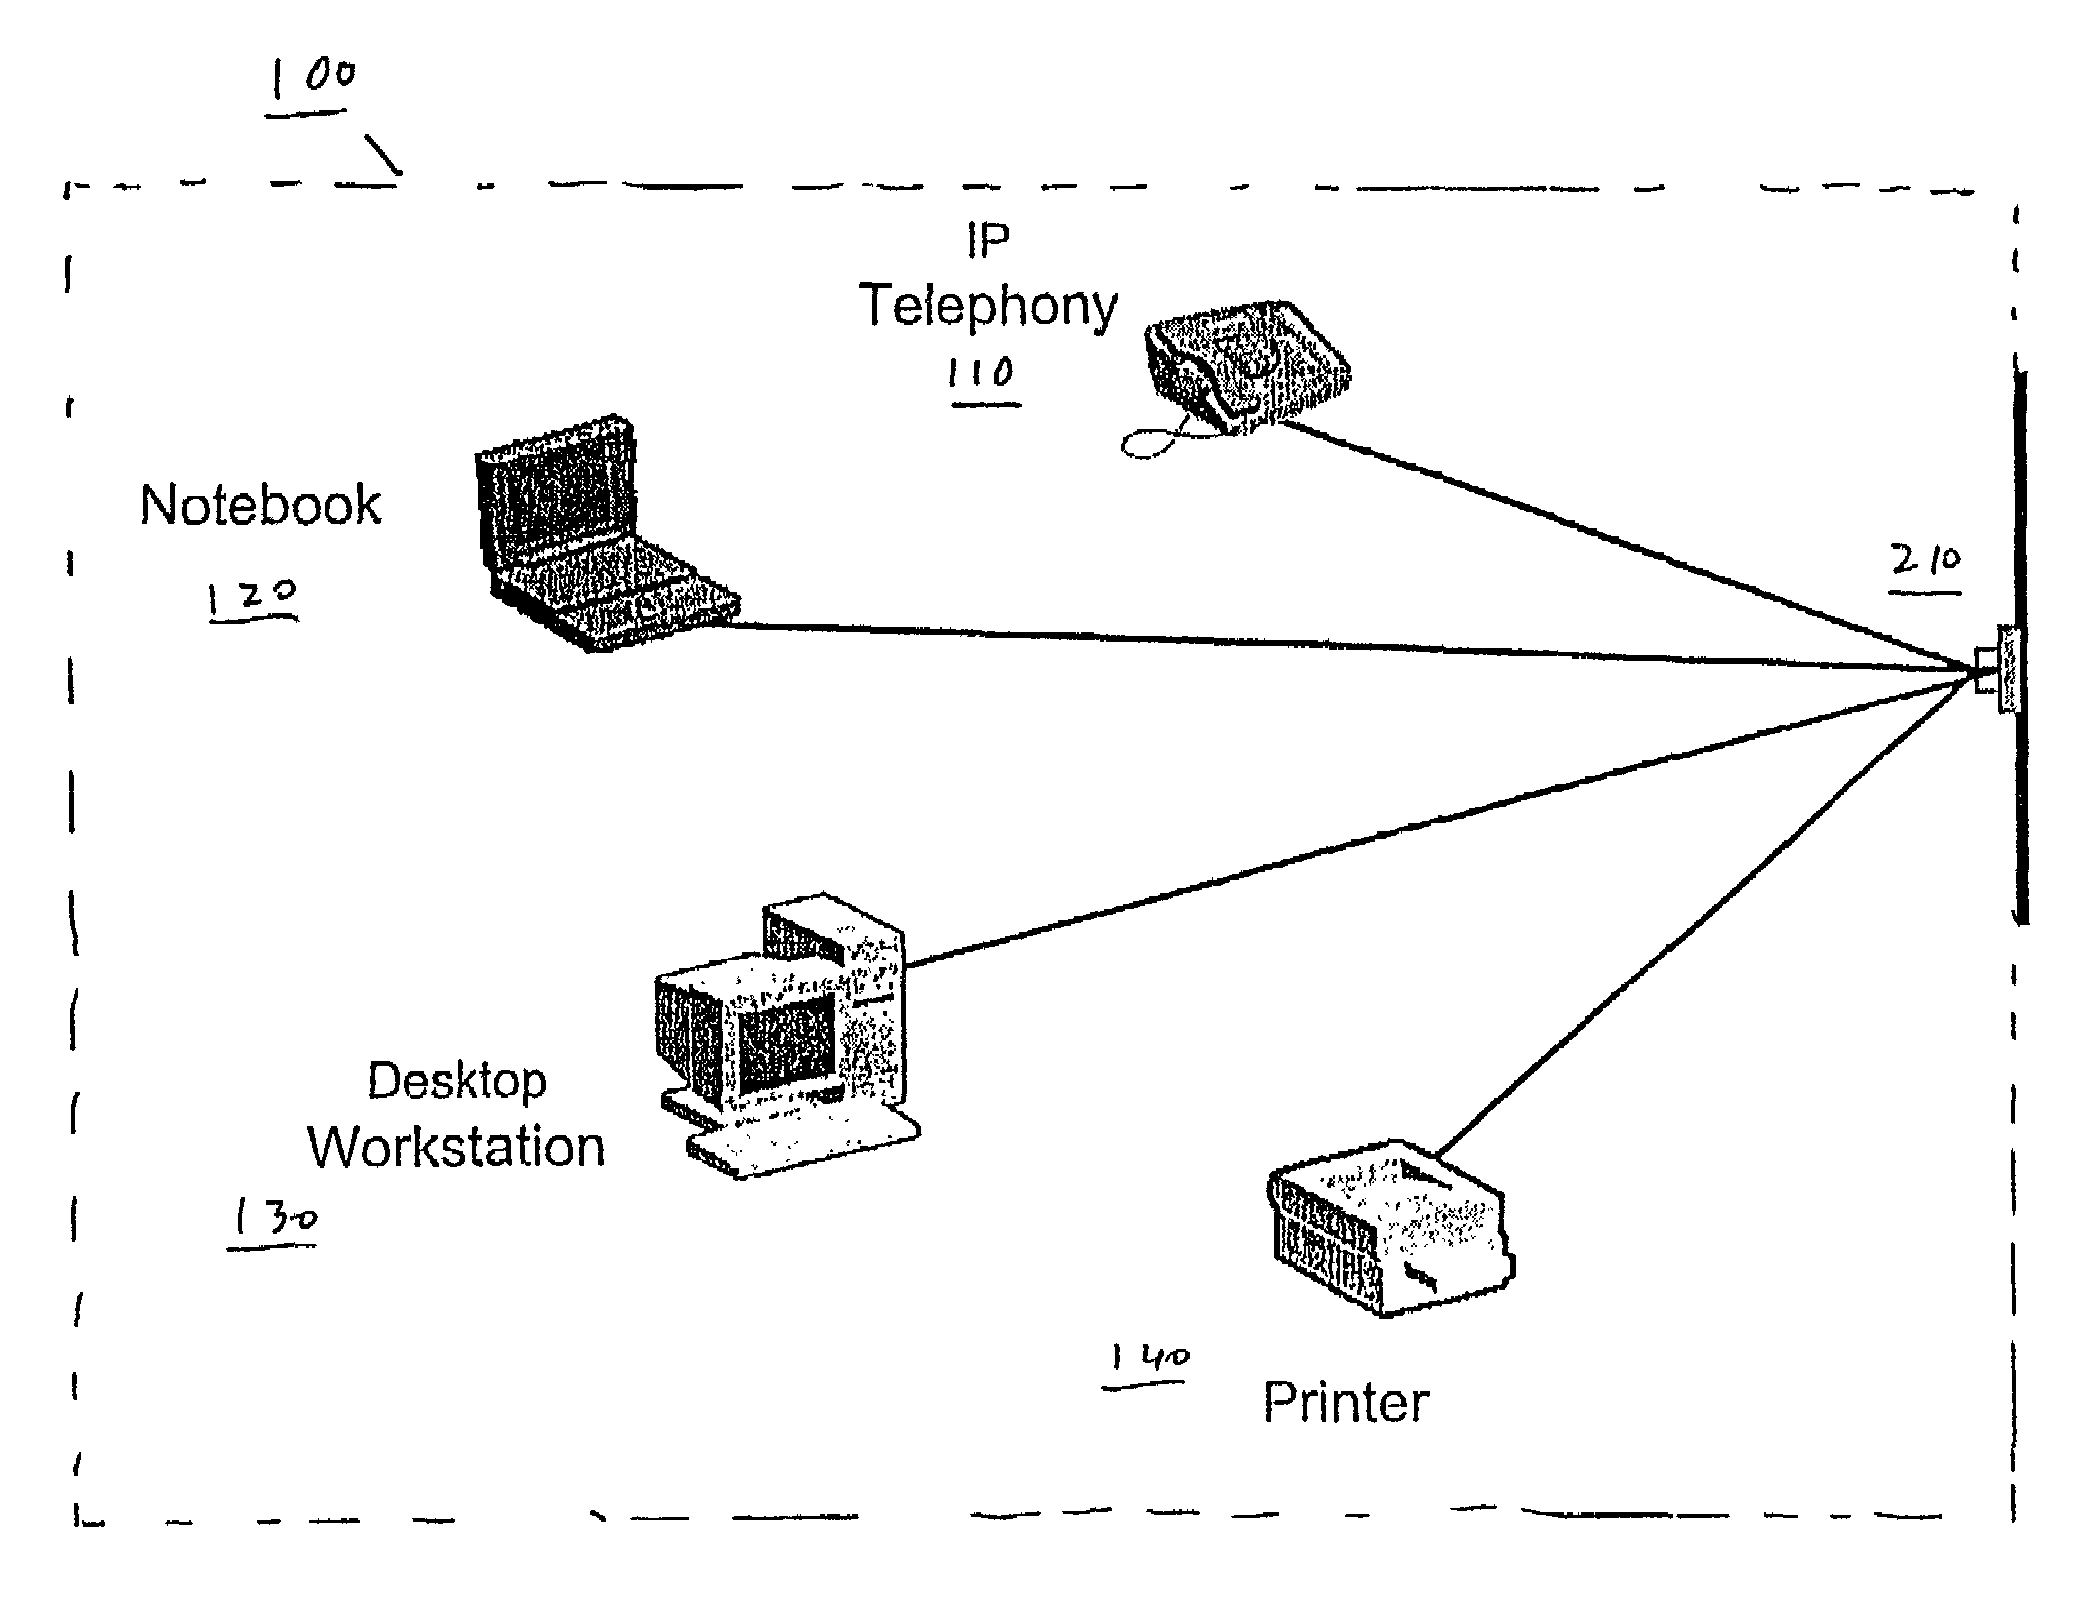 Device and method for managing fault detection and fault isolation in voice and data networks